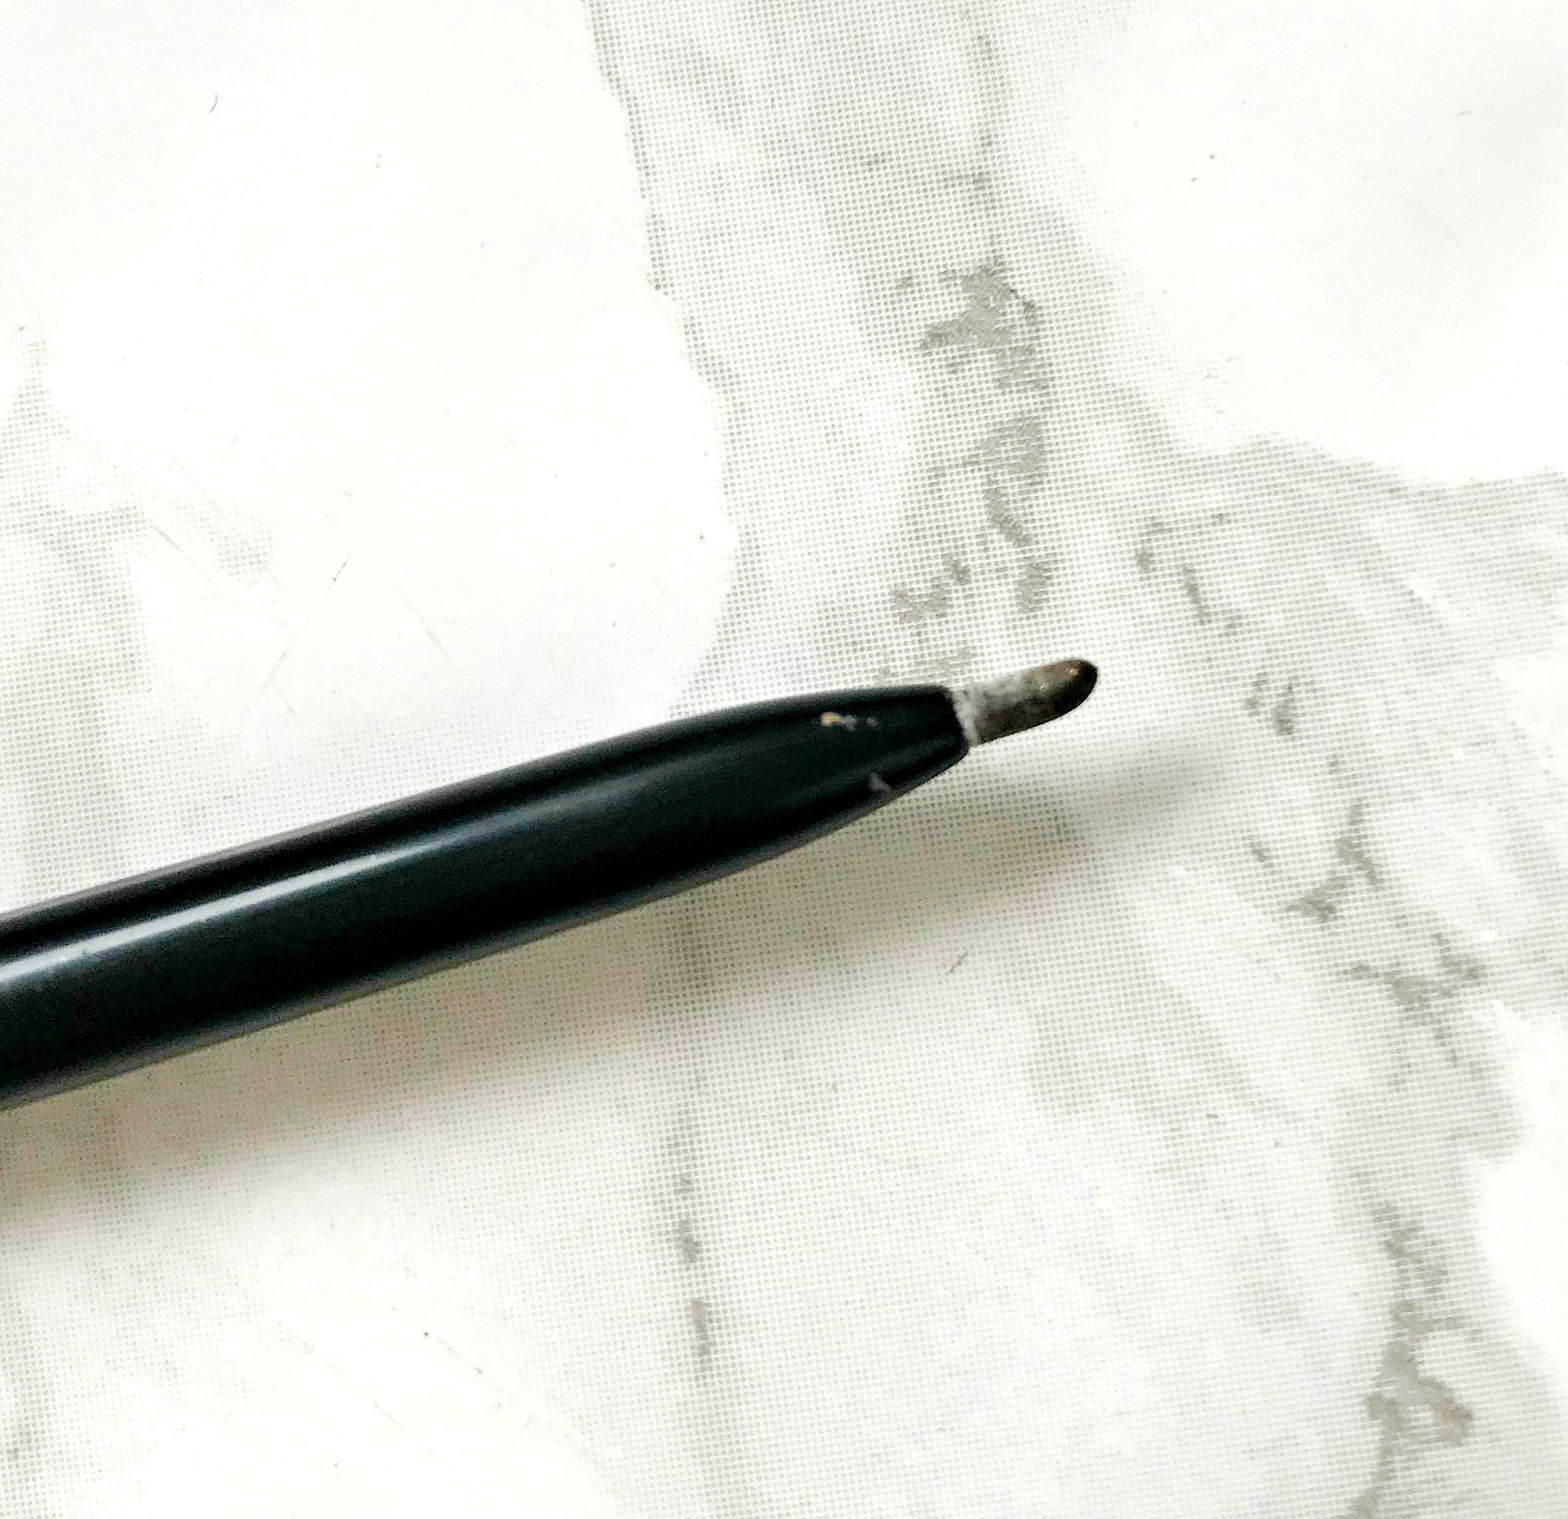 Soap & Glory Archery Brow Pencil Review